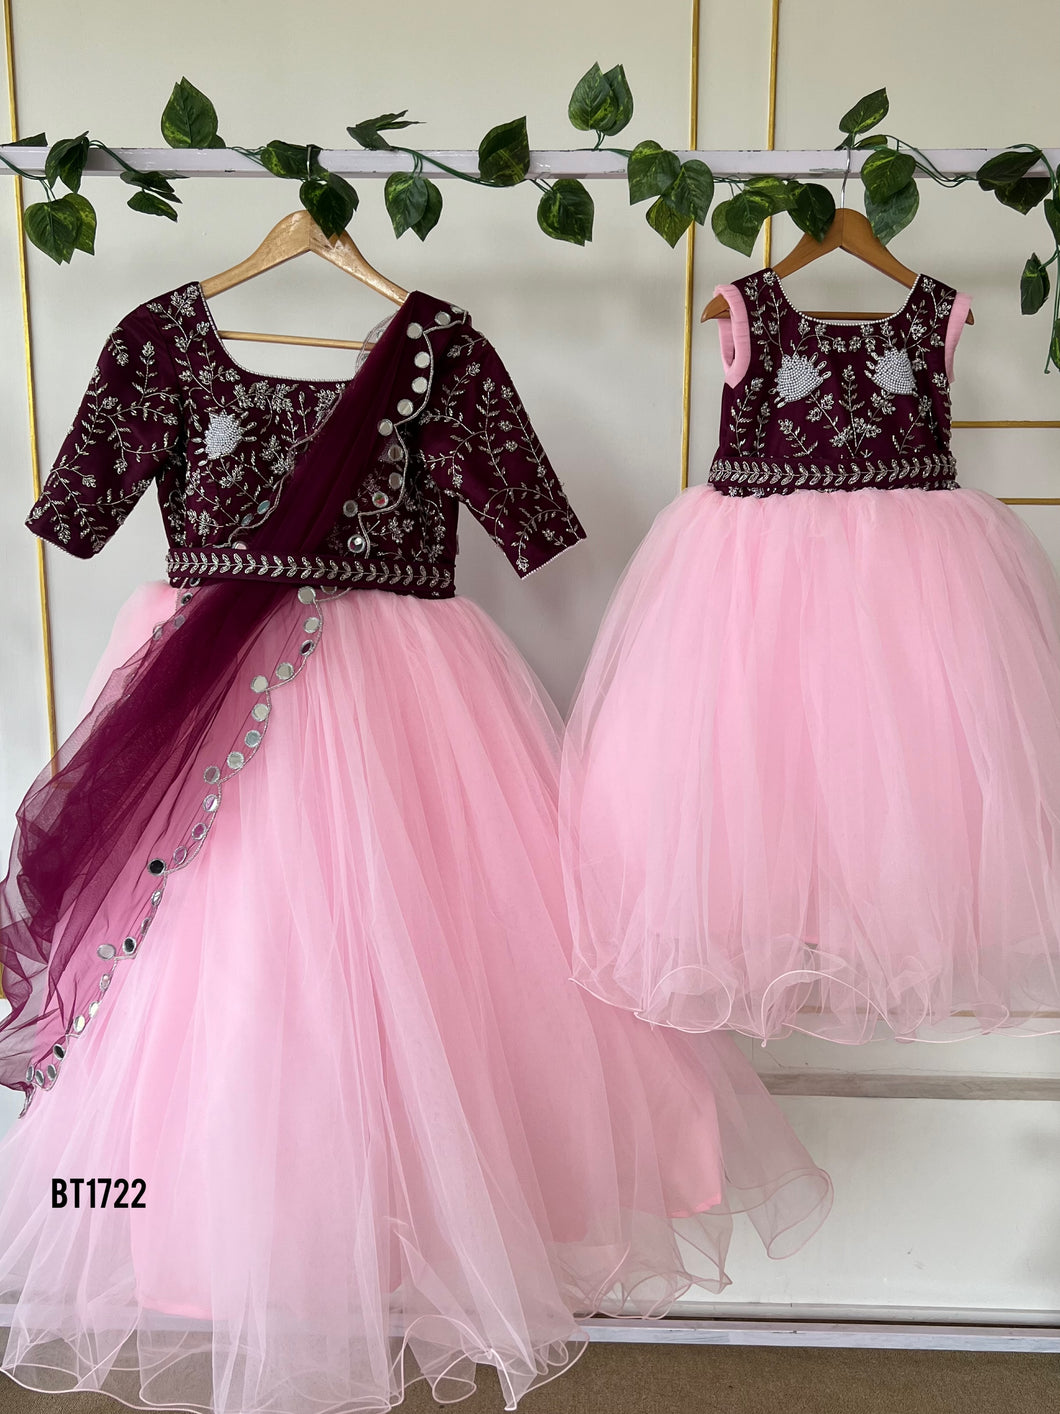 BT1722 Blossom Royale: Maroon and Blush Pink Mommy & Me Gowns